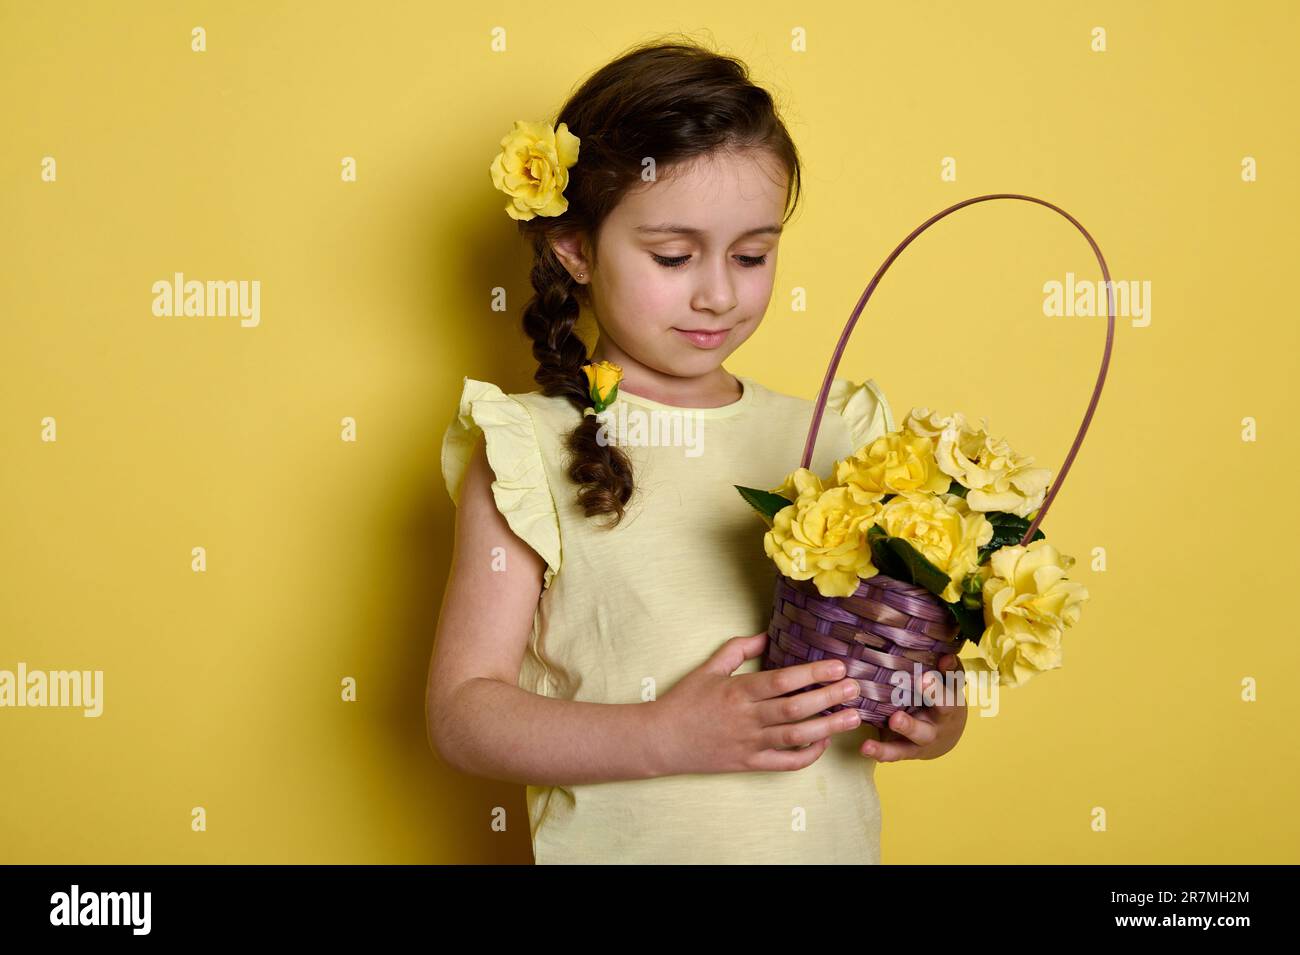 Cute little girl with rose flowers in hairstyle, holding wicker basket full of yellow roses, isolated studio background. Stock Photo